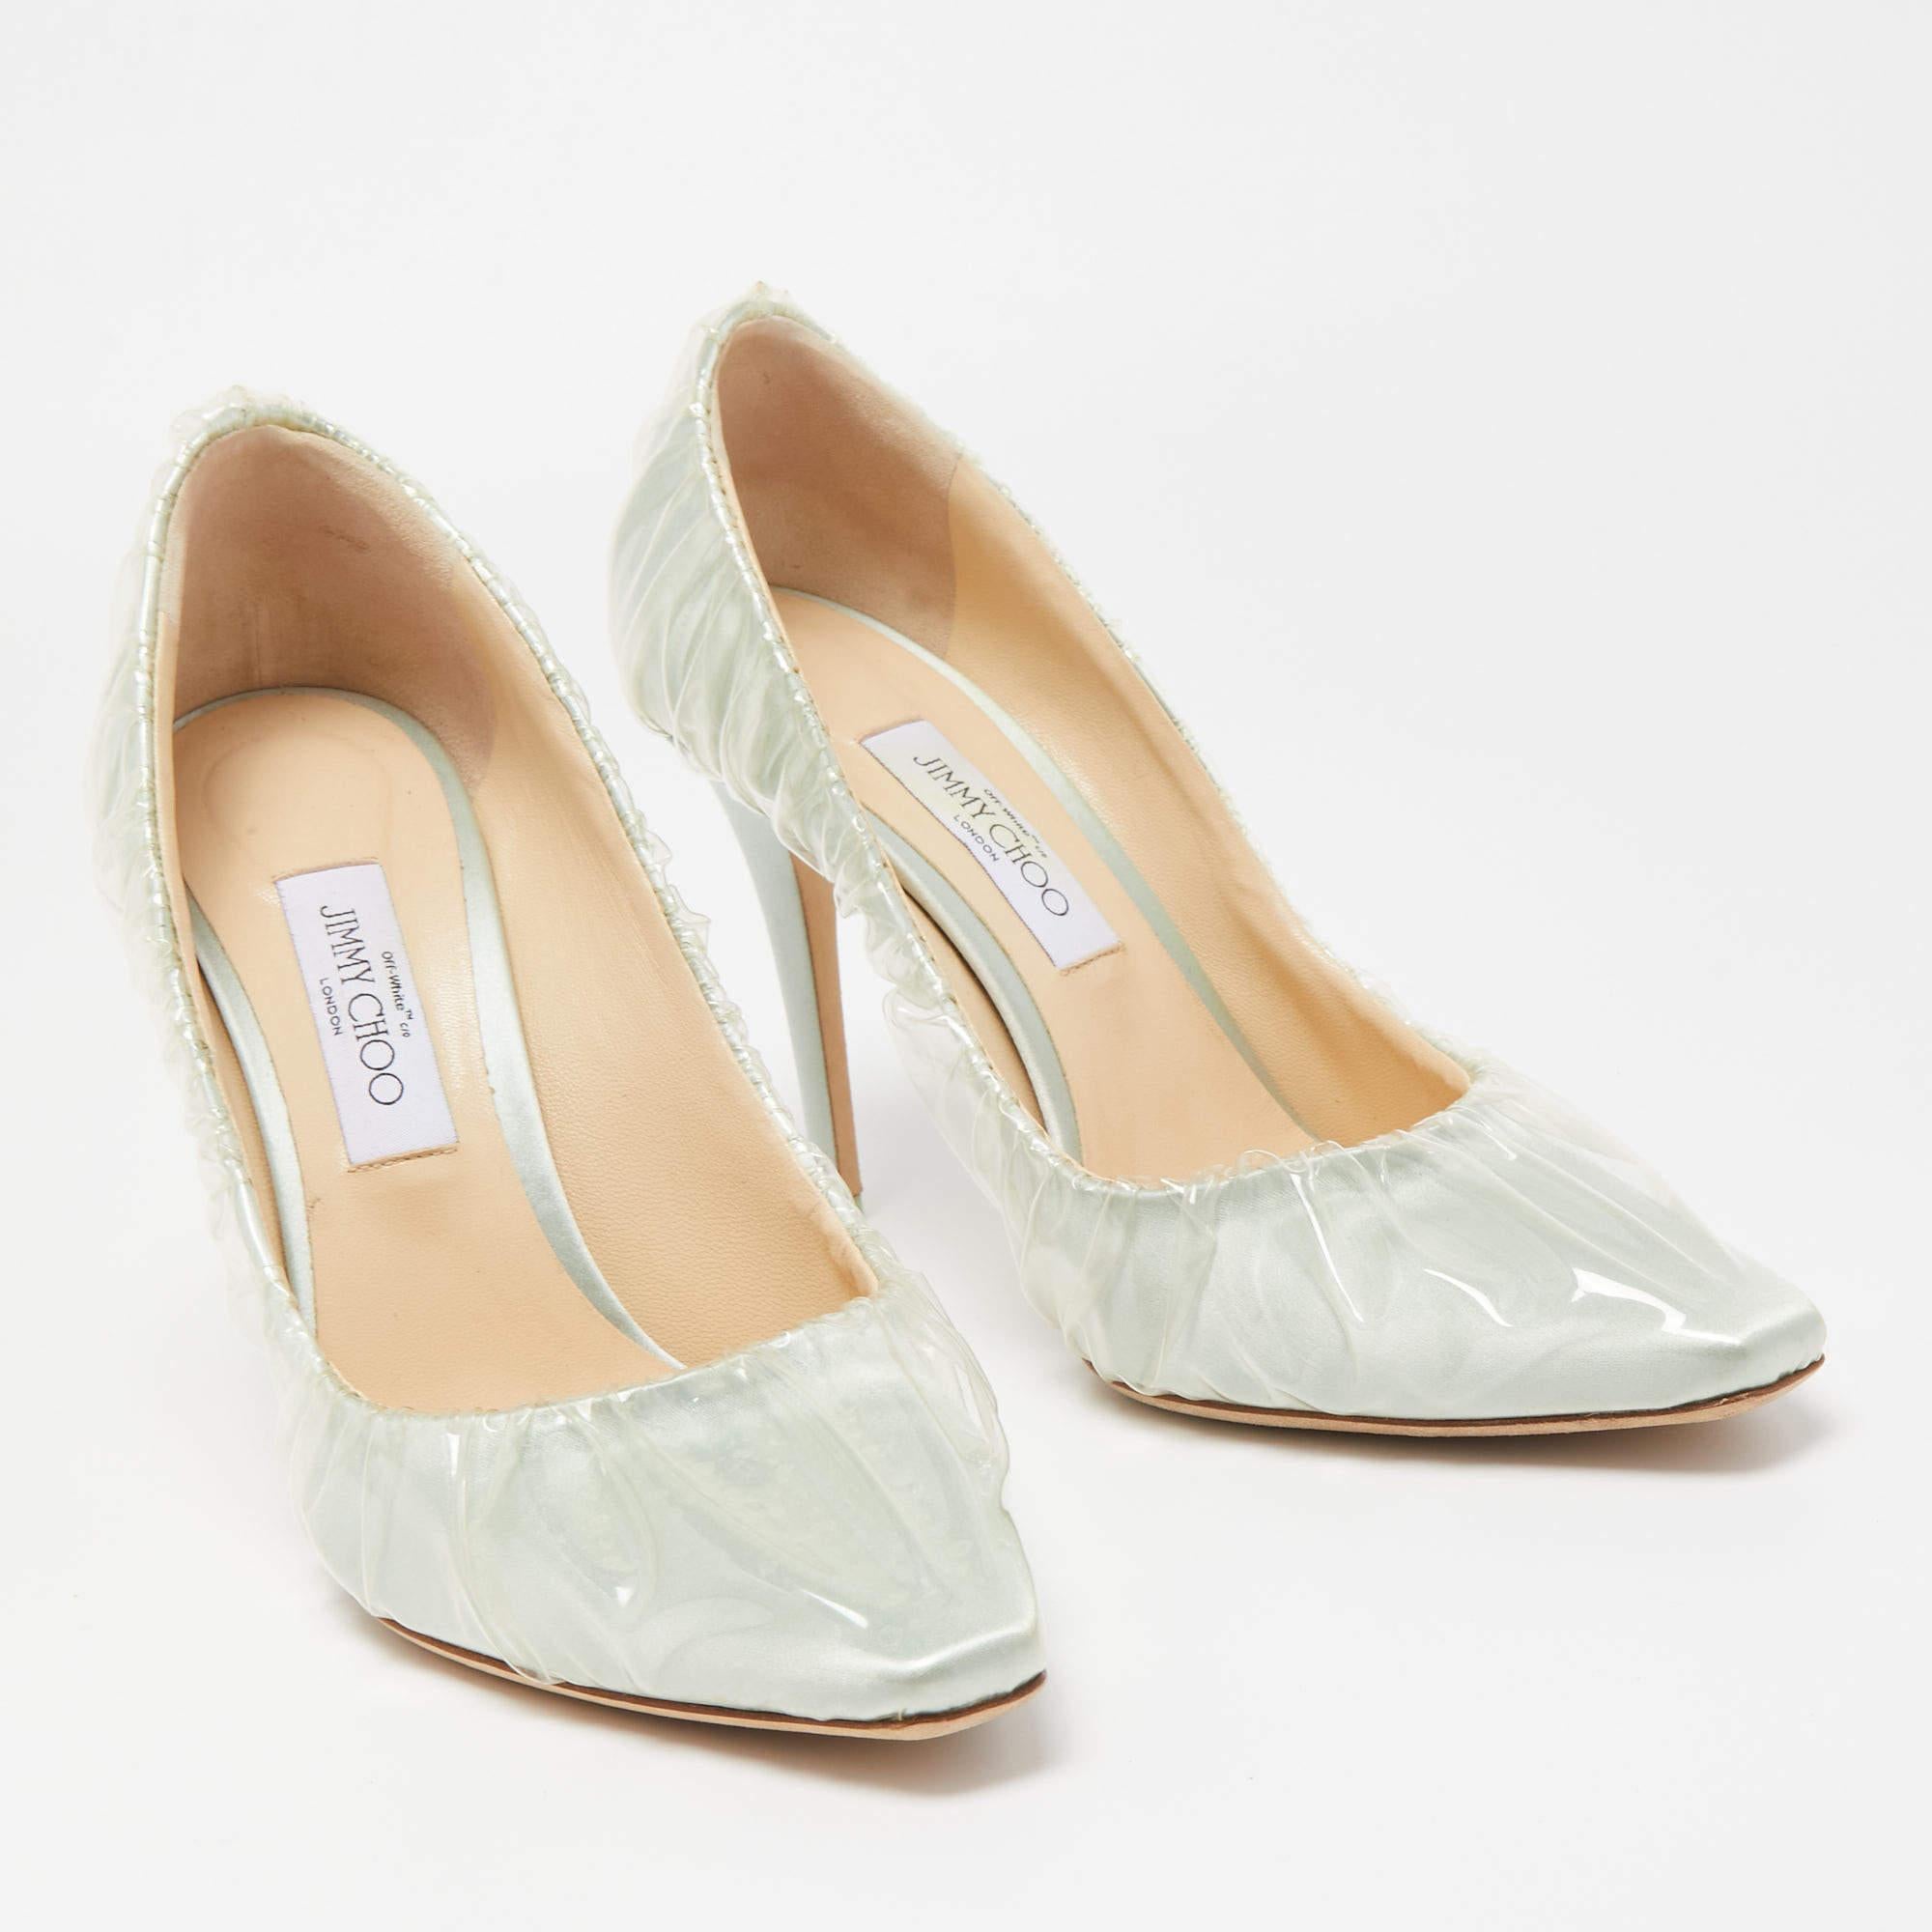 Jimmy Choo x Off-White Light Green Satin and Pleated PVC Anne Pumps Size 41 In Good Condition For Sale In Dubai, Al Qouz 2